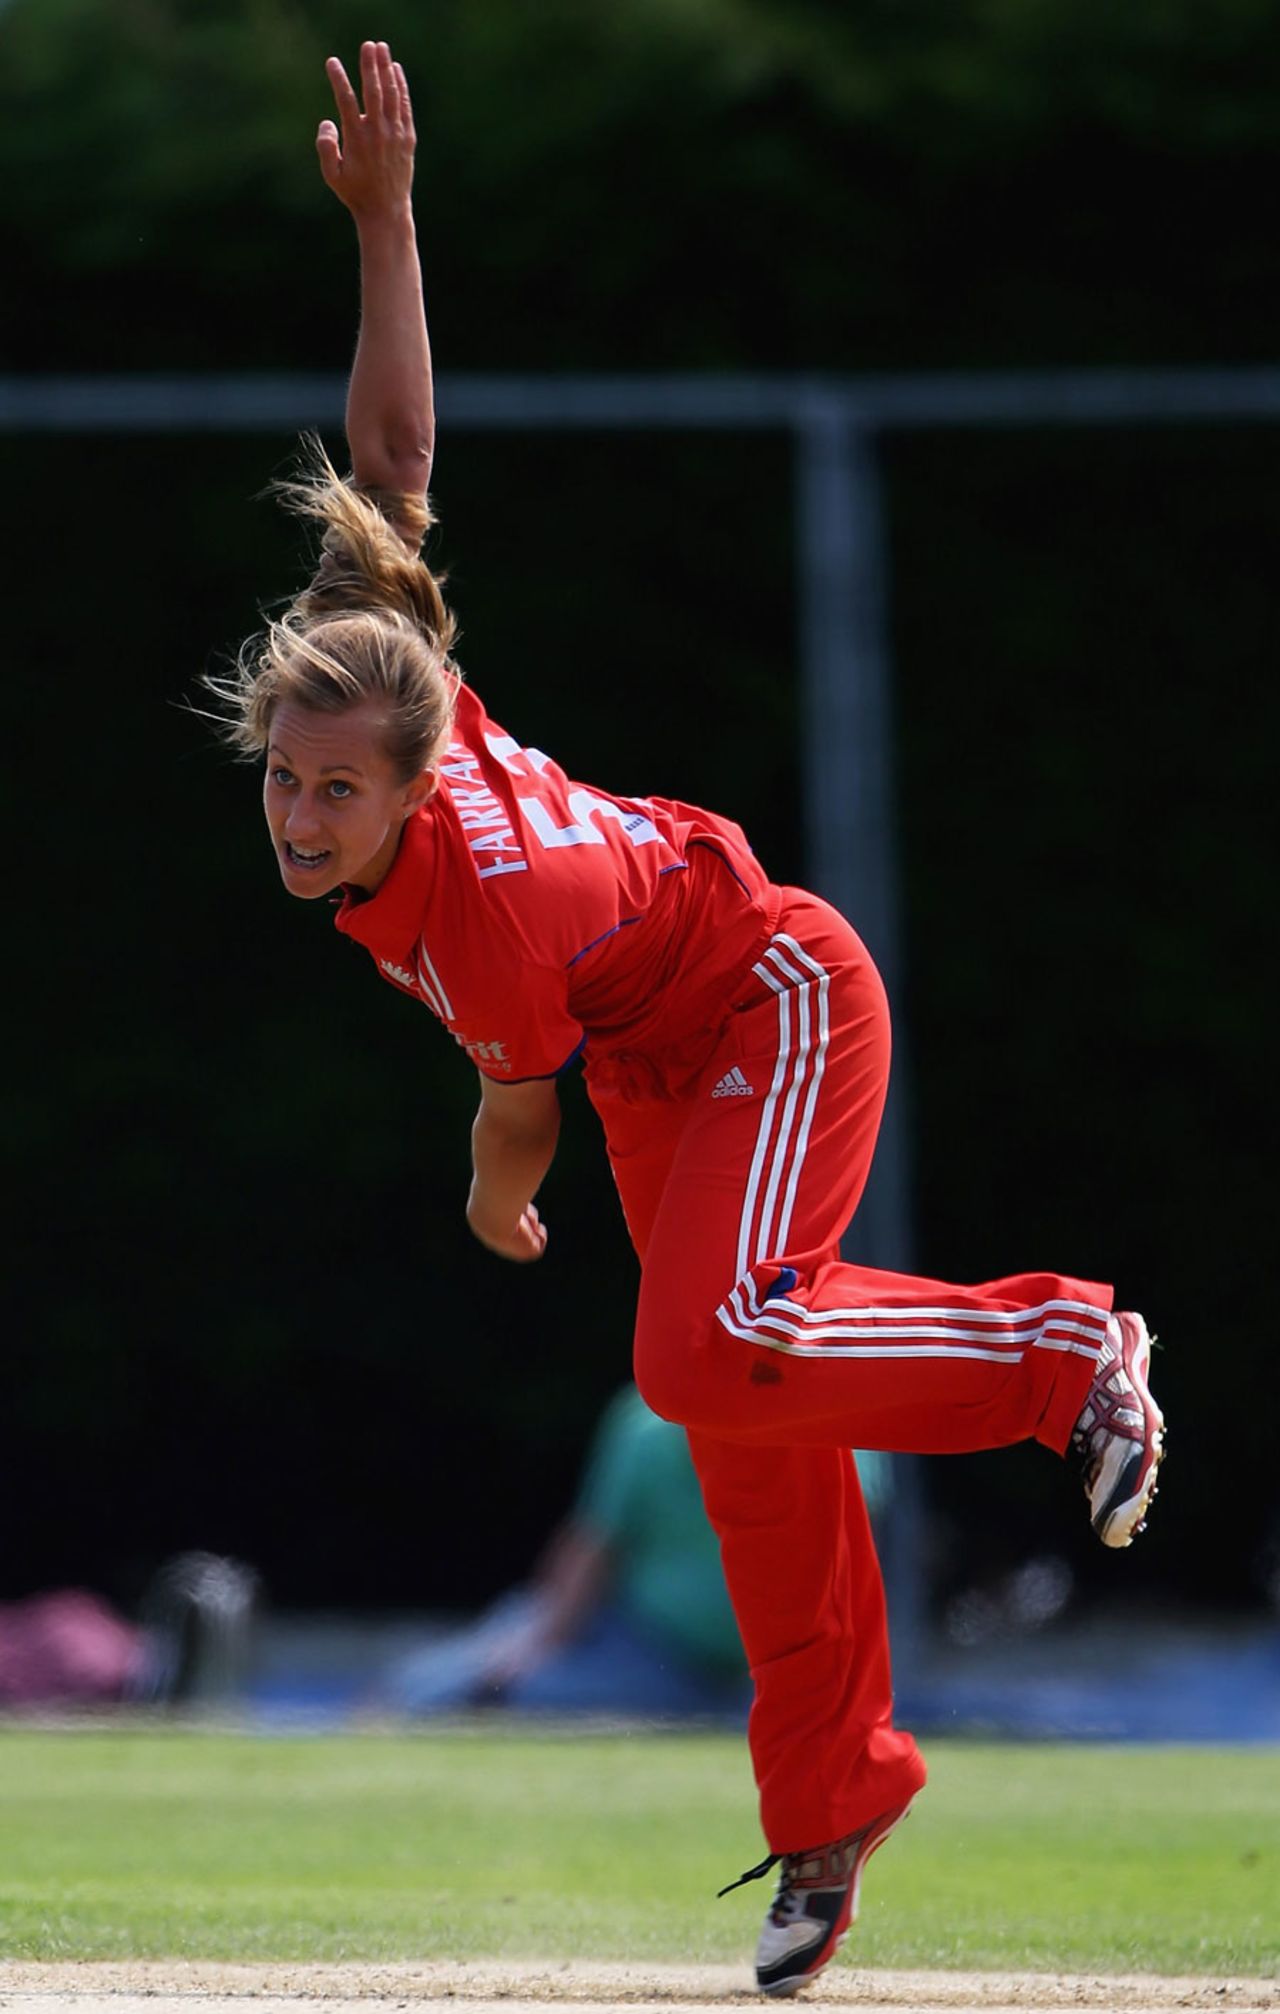 Natasha Farrant took two wickets in an over on England debut, England v Pakistan, 1st women's T20, Loughborough, July 5, 2013